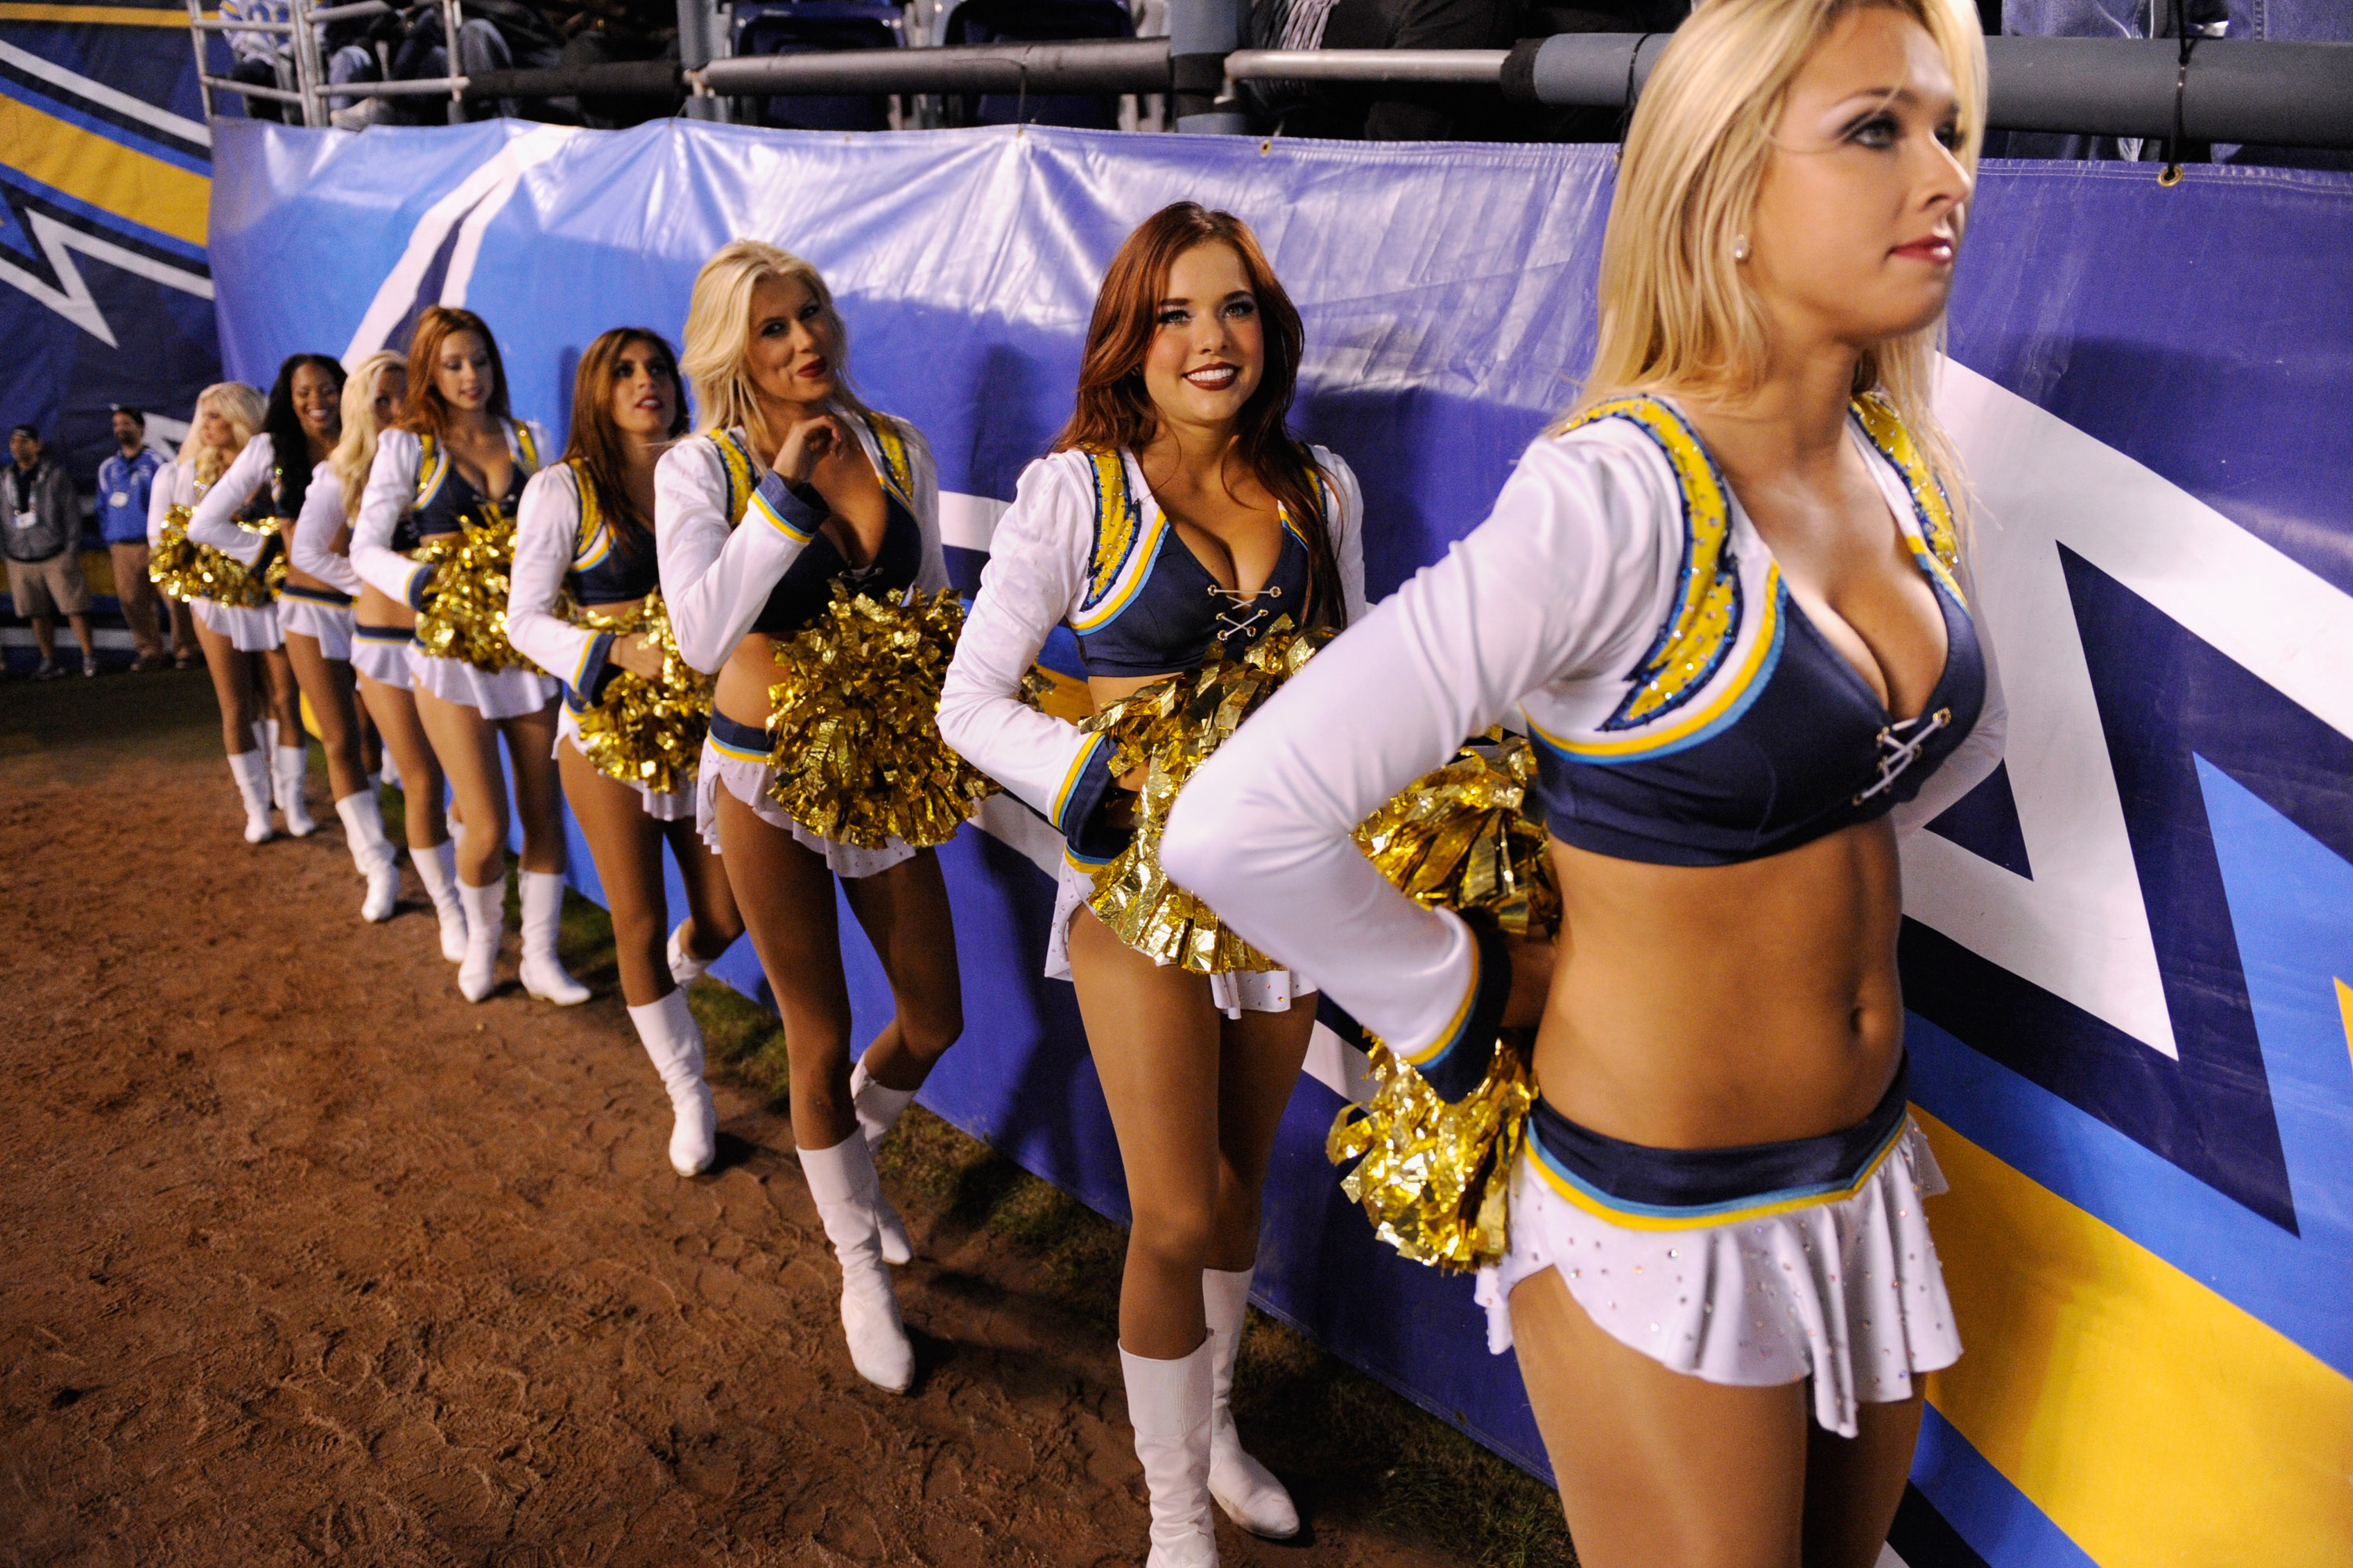 SAN DIEGO - NOVEMBER 22:  Cheerleaders of San Diego Chargers during the game against Denver Broncos at Qualcomm Stadium on November 22, 2010 in San Diego, California.  Chargers defeated the Broncos, 35-14.  (Photo by Kevork Djansezian/Getty Images)